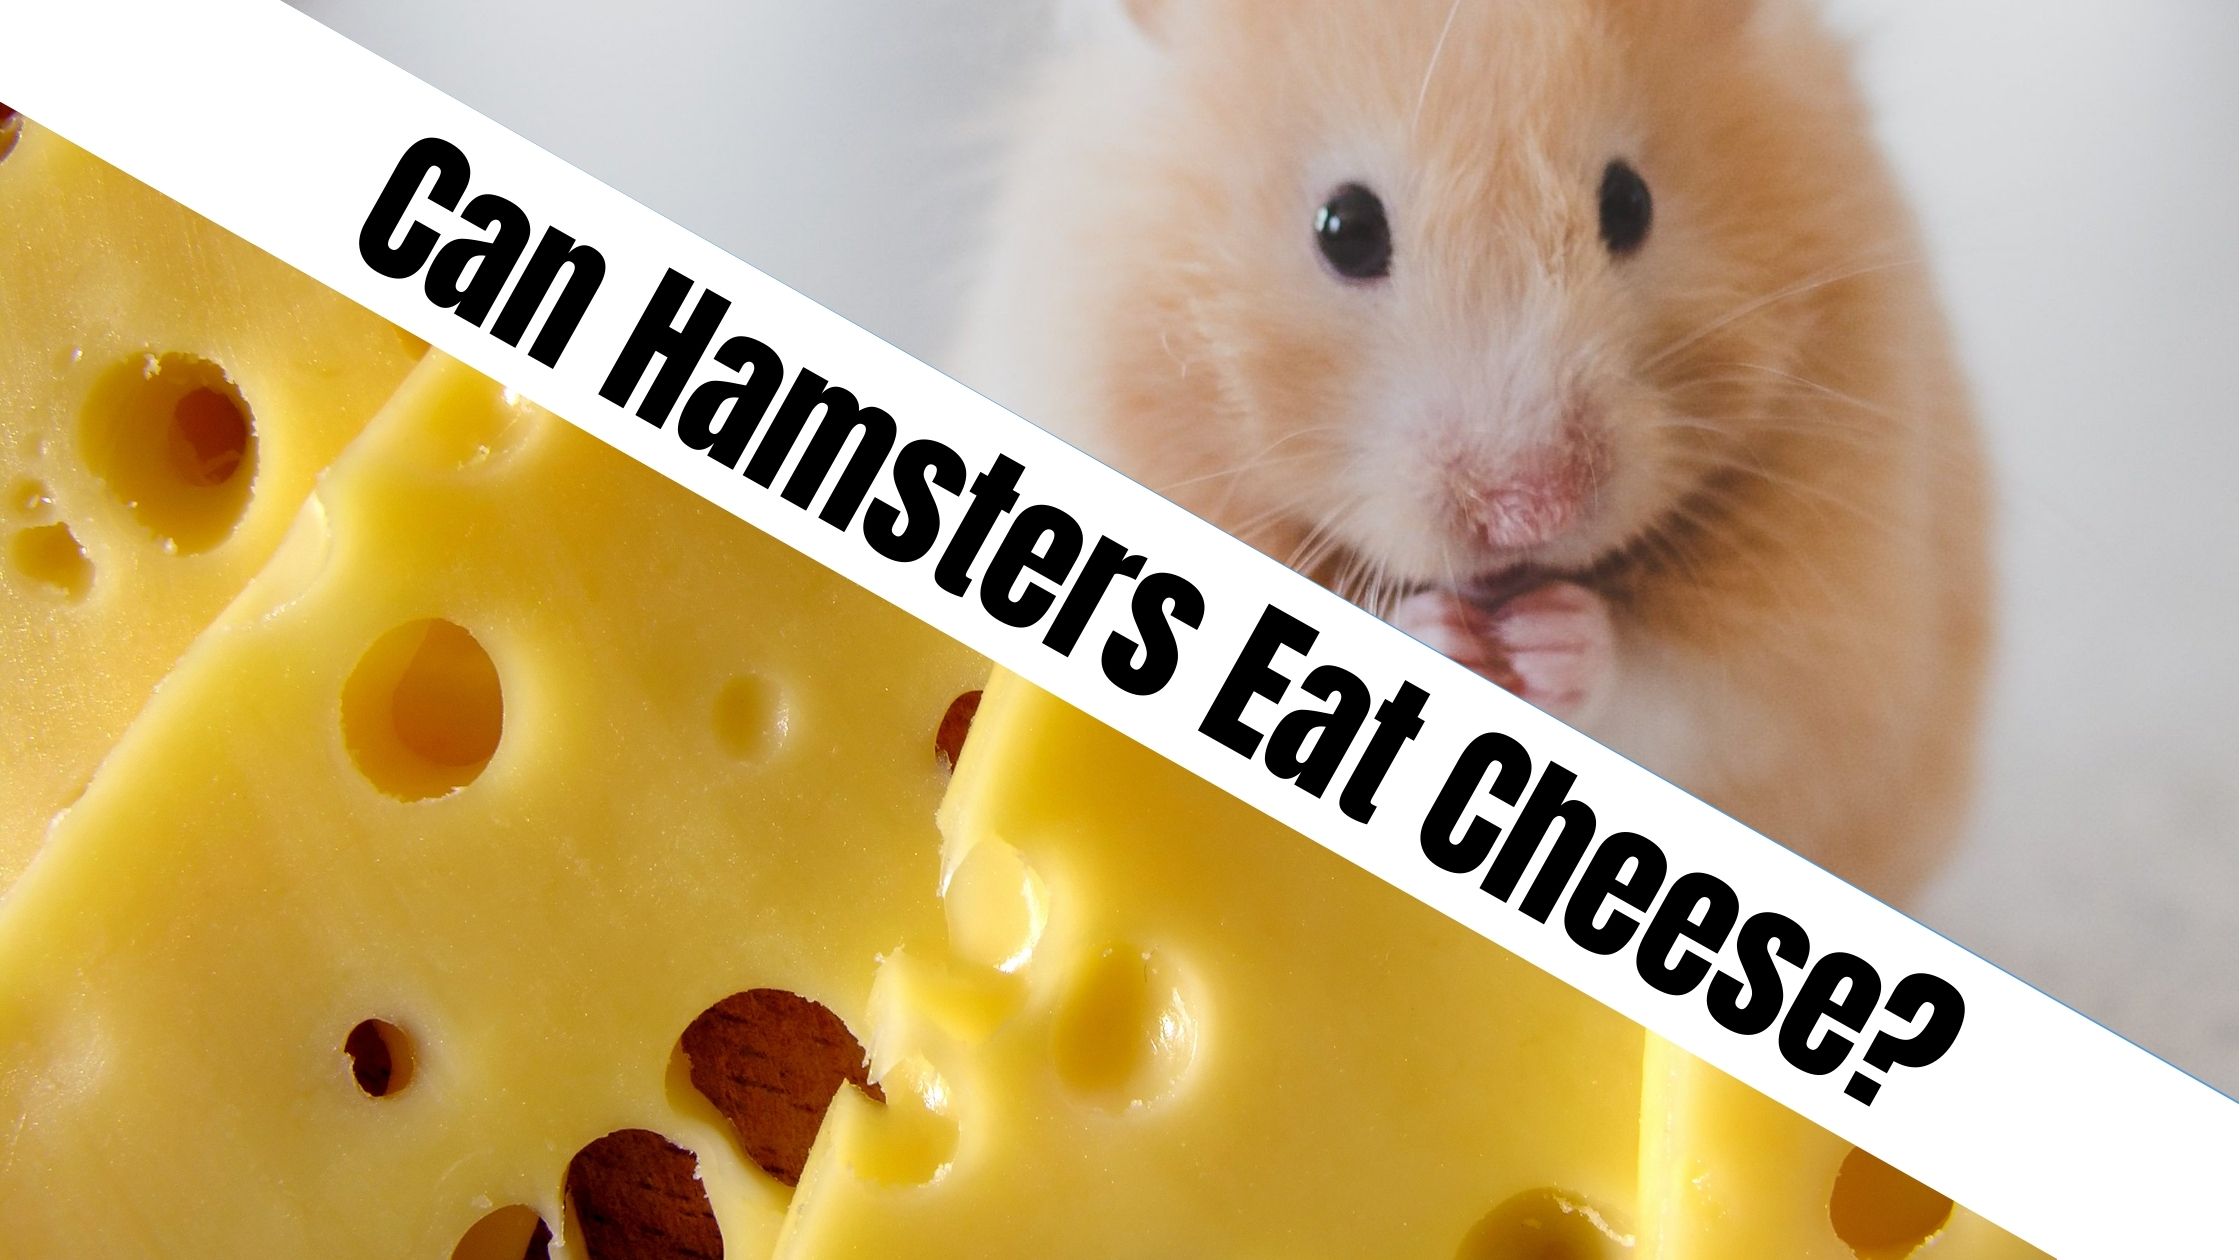 Can Hamsters Eat Cheese?